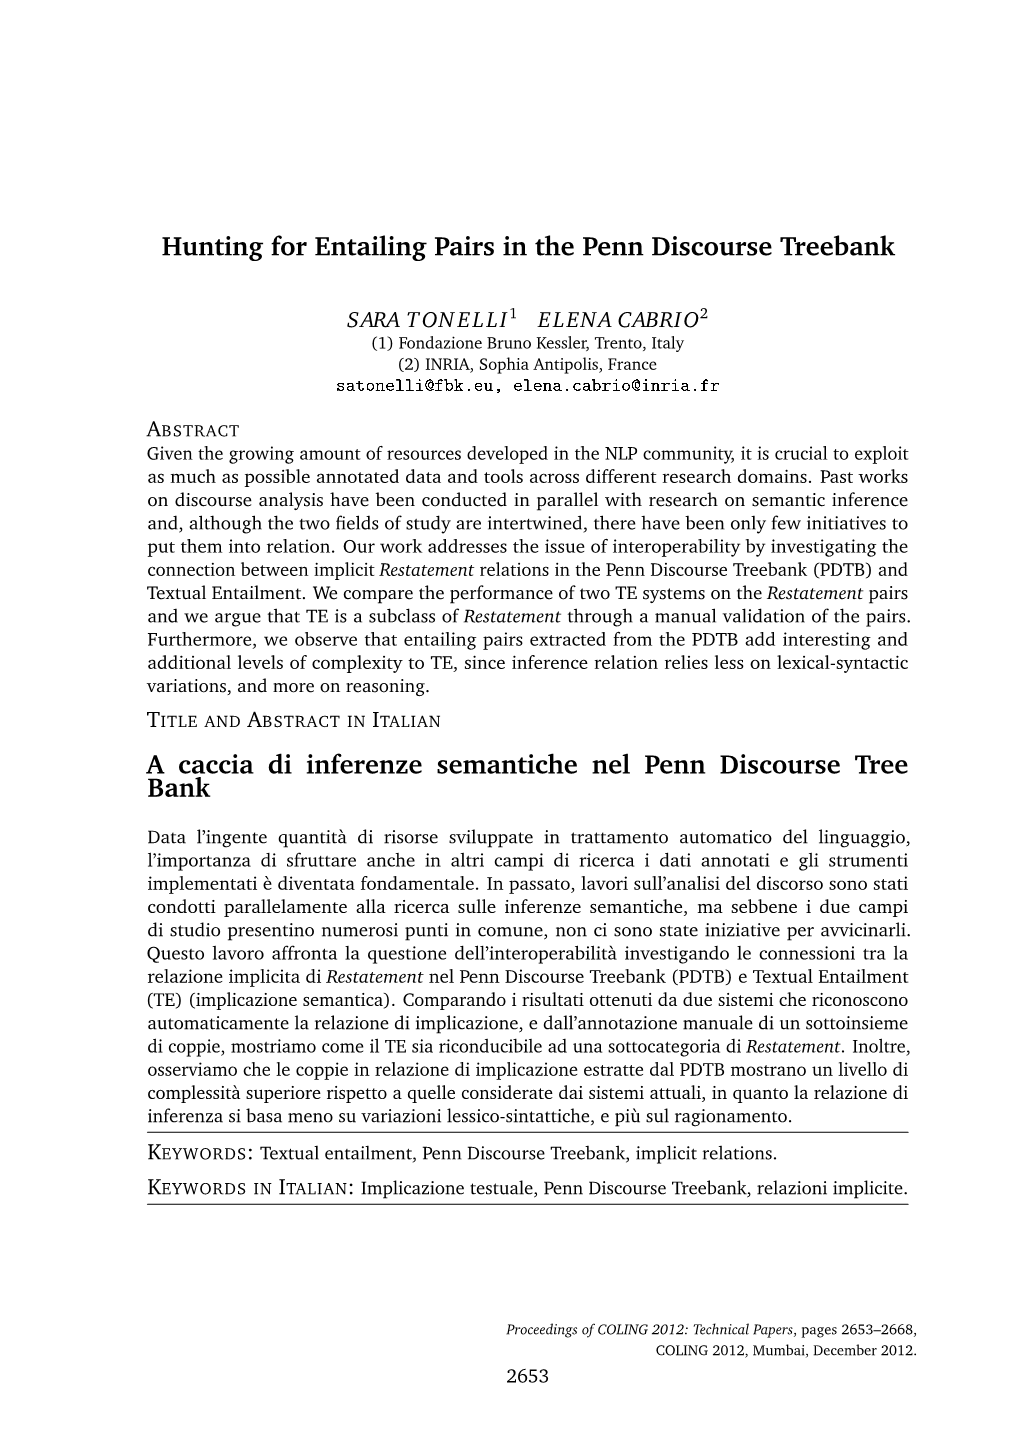 Hunting for Entailing Pairs in the Penn Discourse Treebank